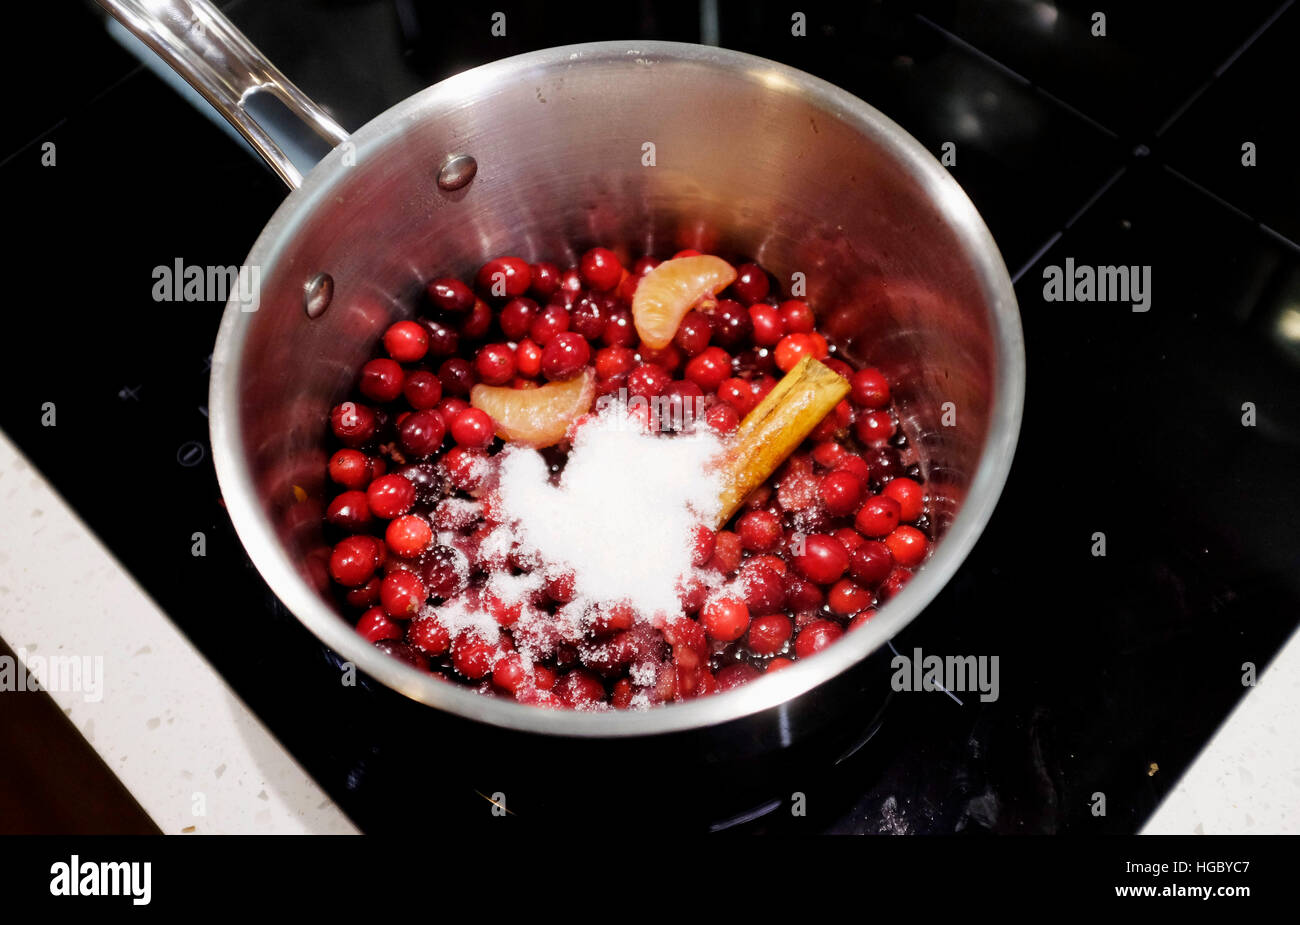 Cranberry sauce being made with cranberries sugar and cinnamon stick Stock Photo